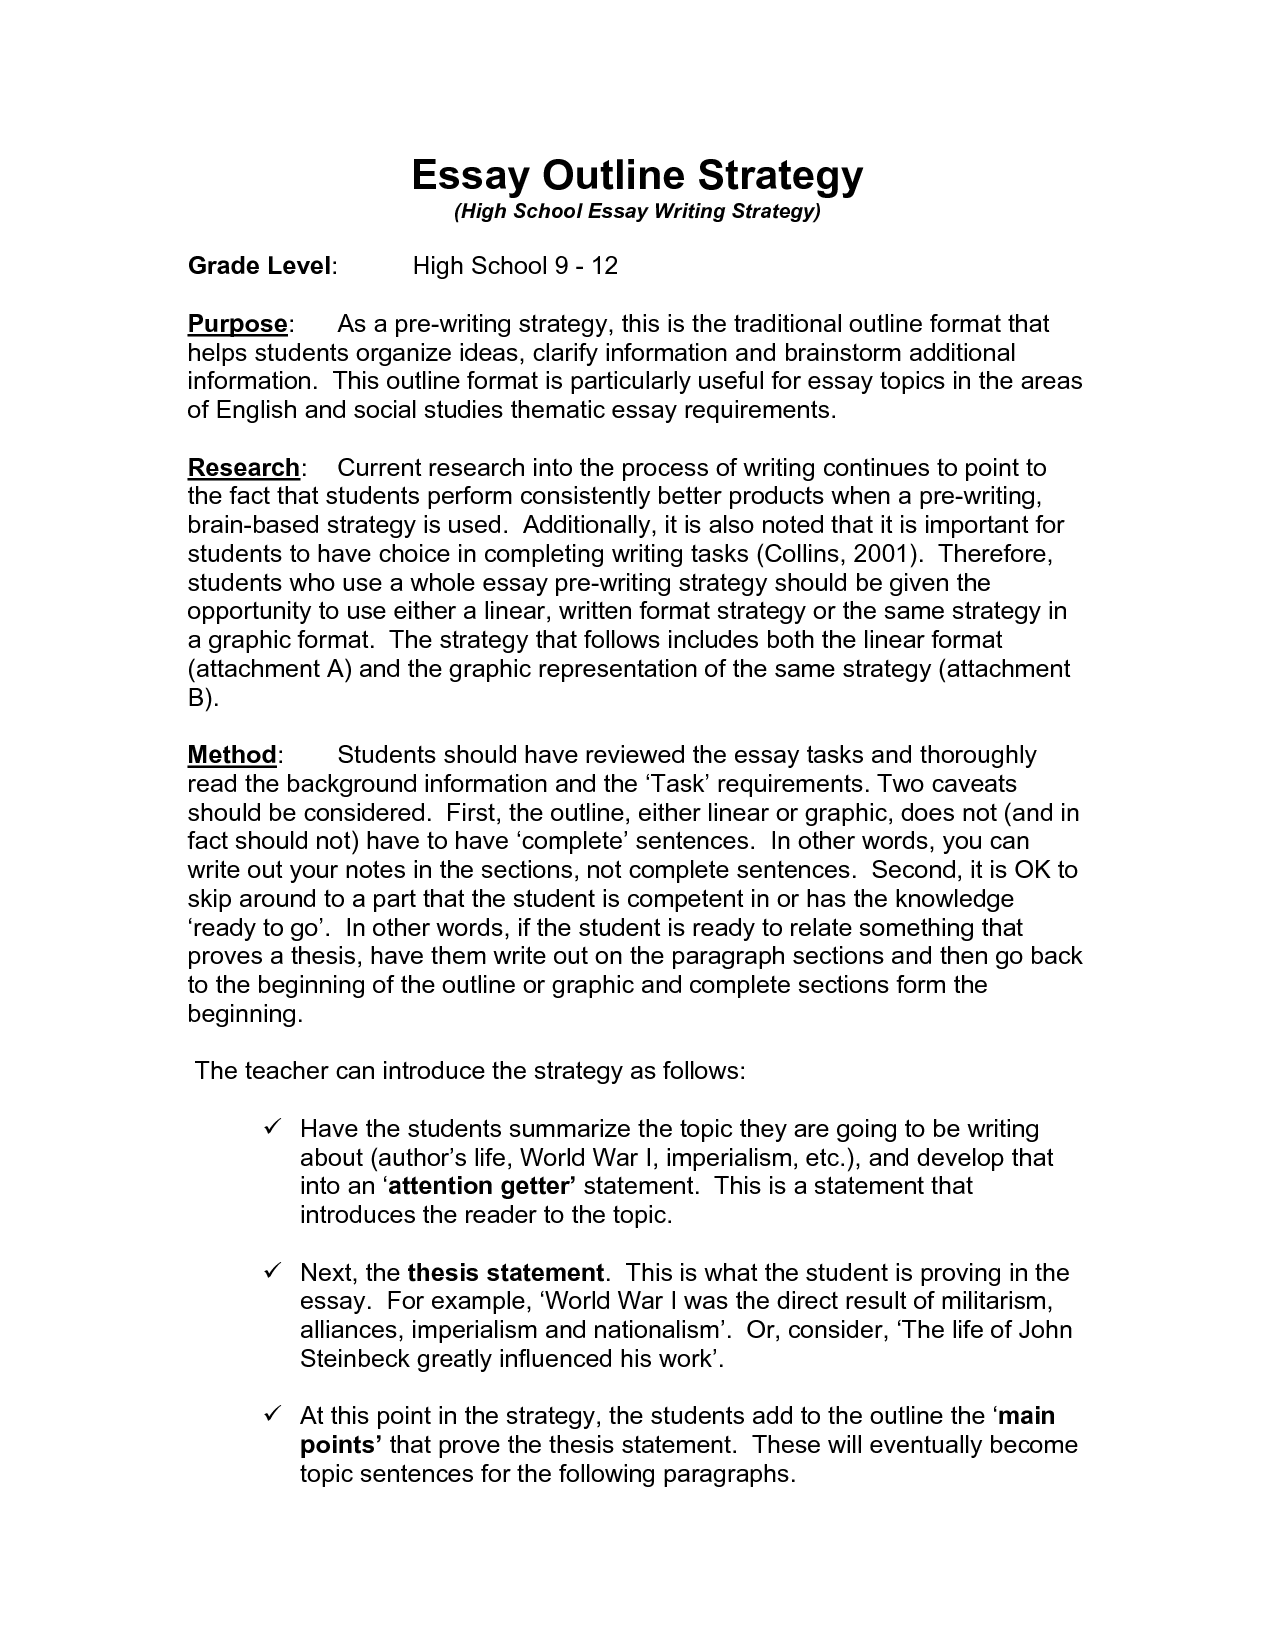 What is proper outline format for a research paper